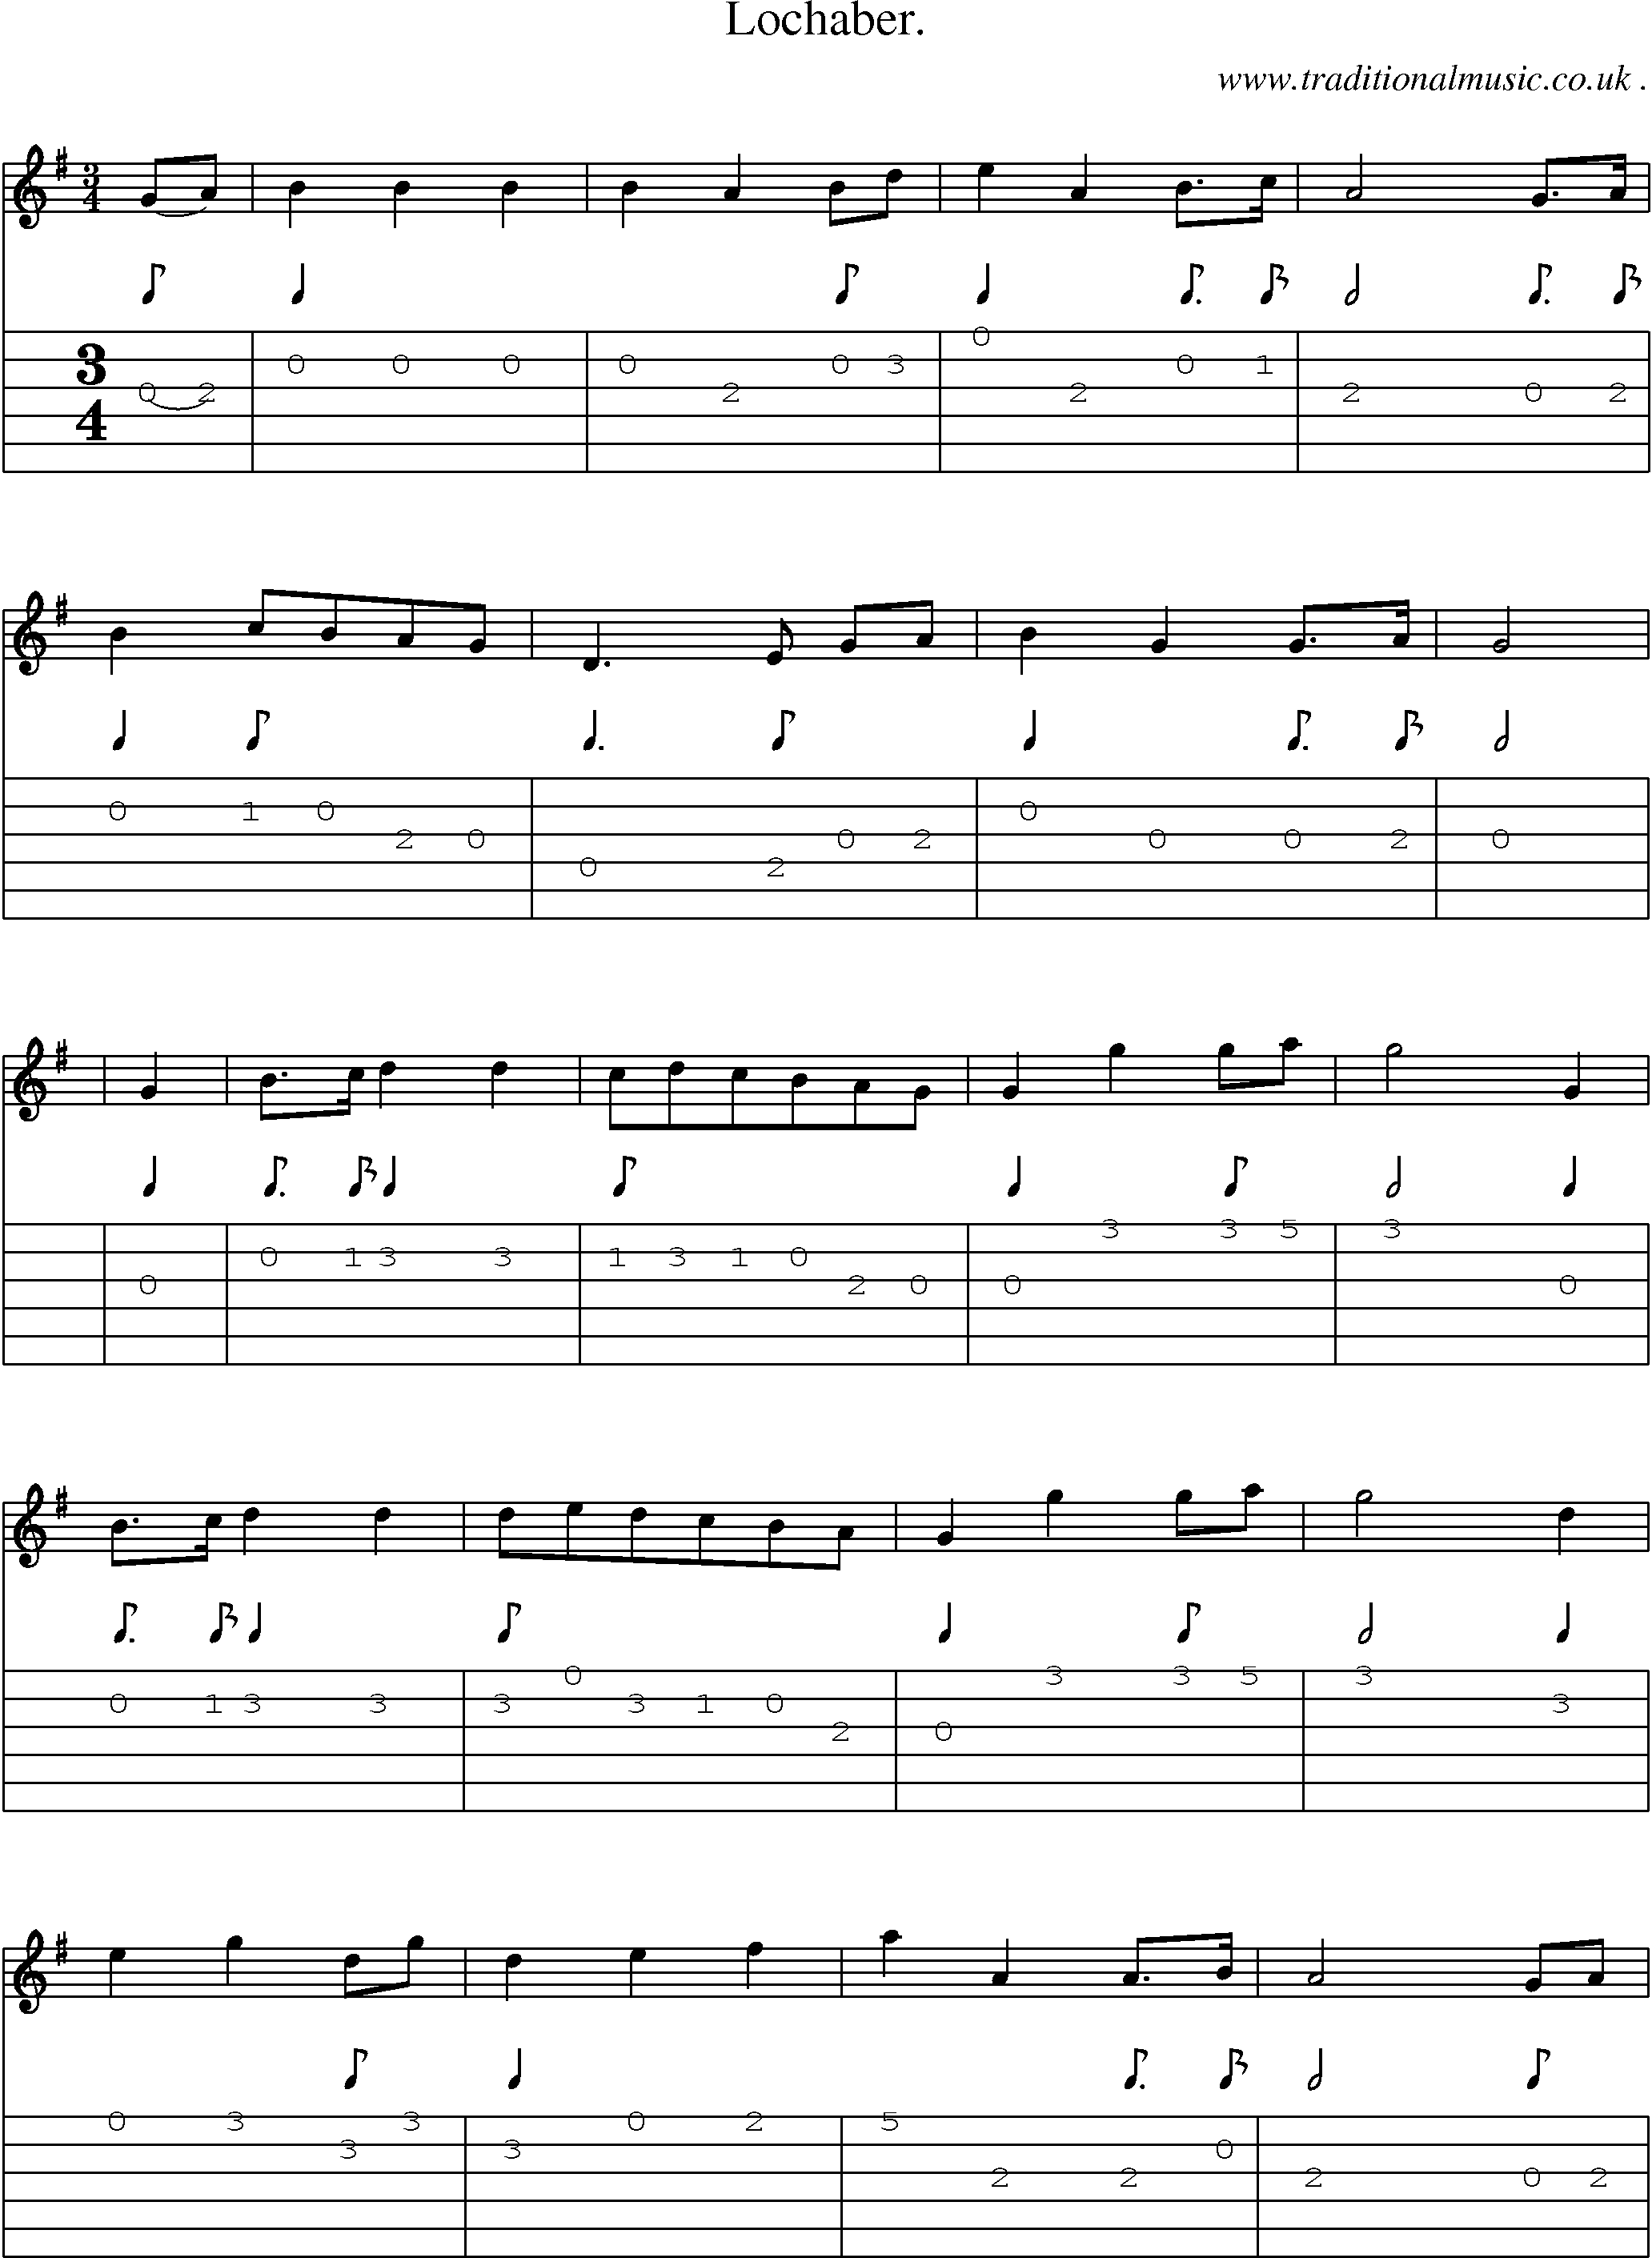 Sheet-Music and Guitar Tabs for Lochaber